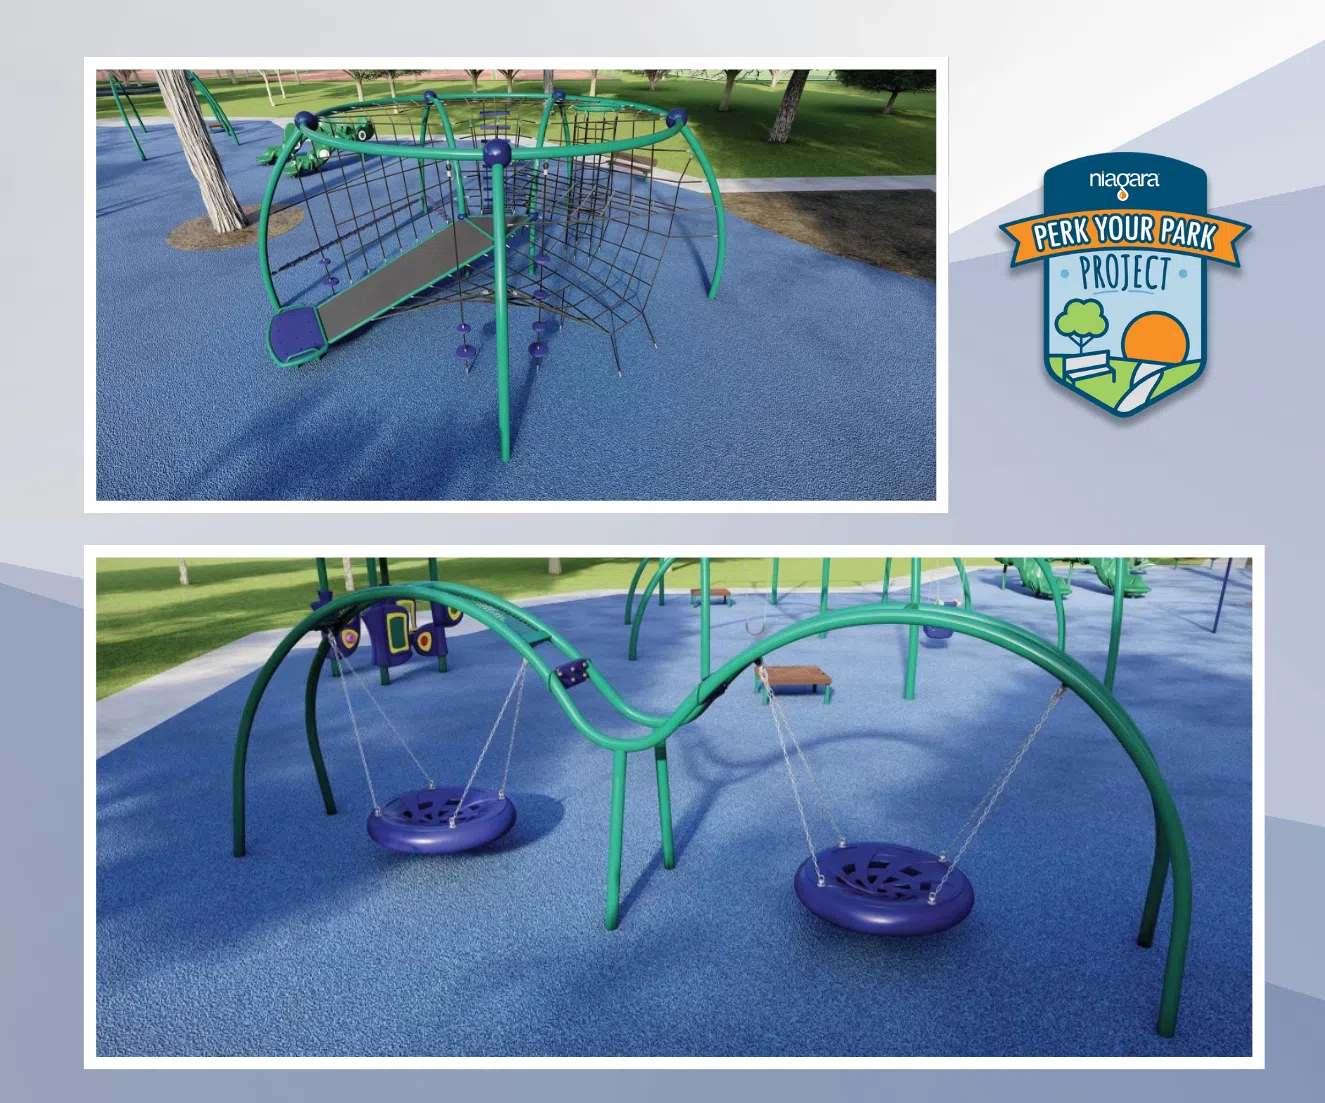 City set to reopen Kids Kingdom Playscape in Starcke Park